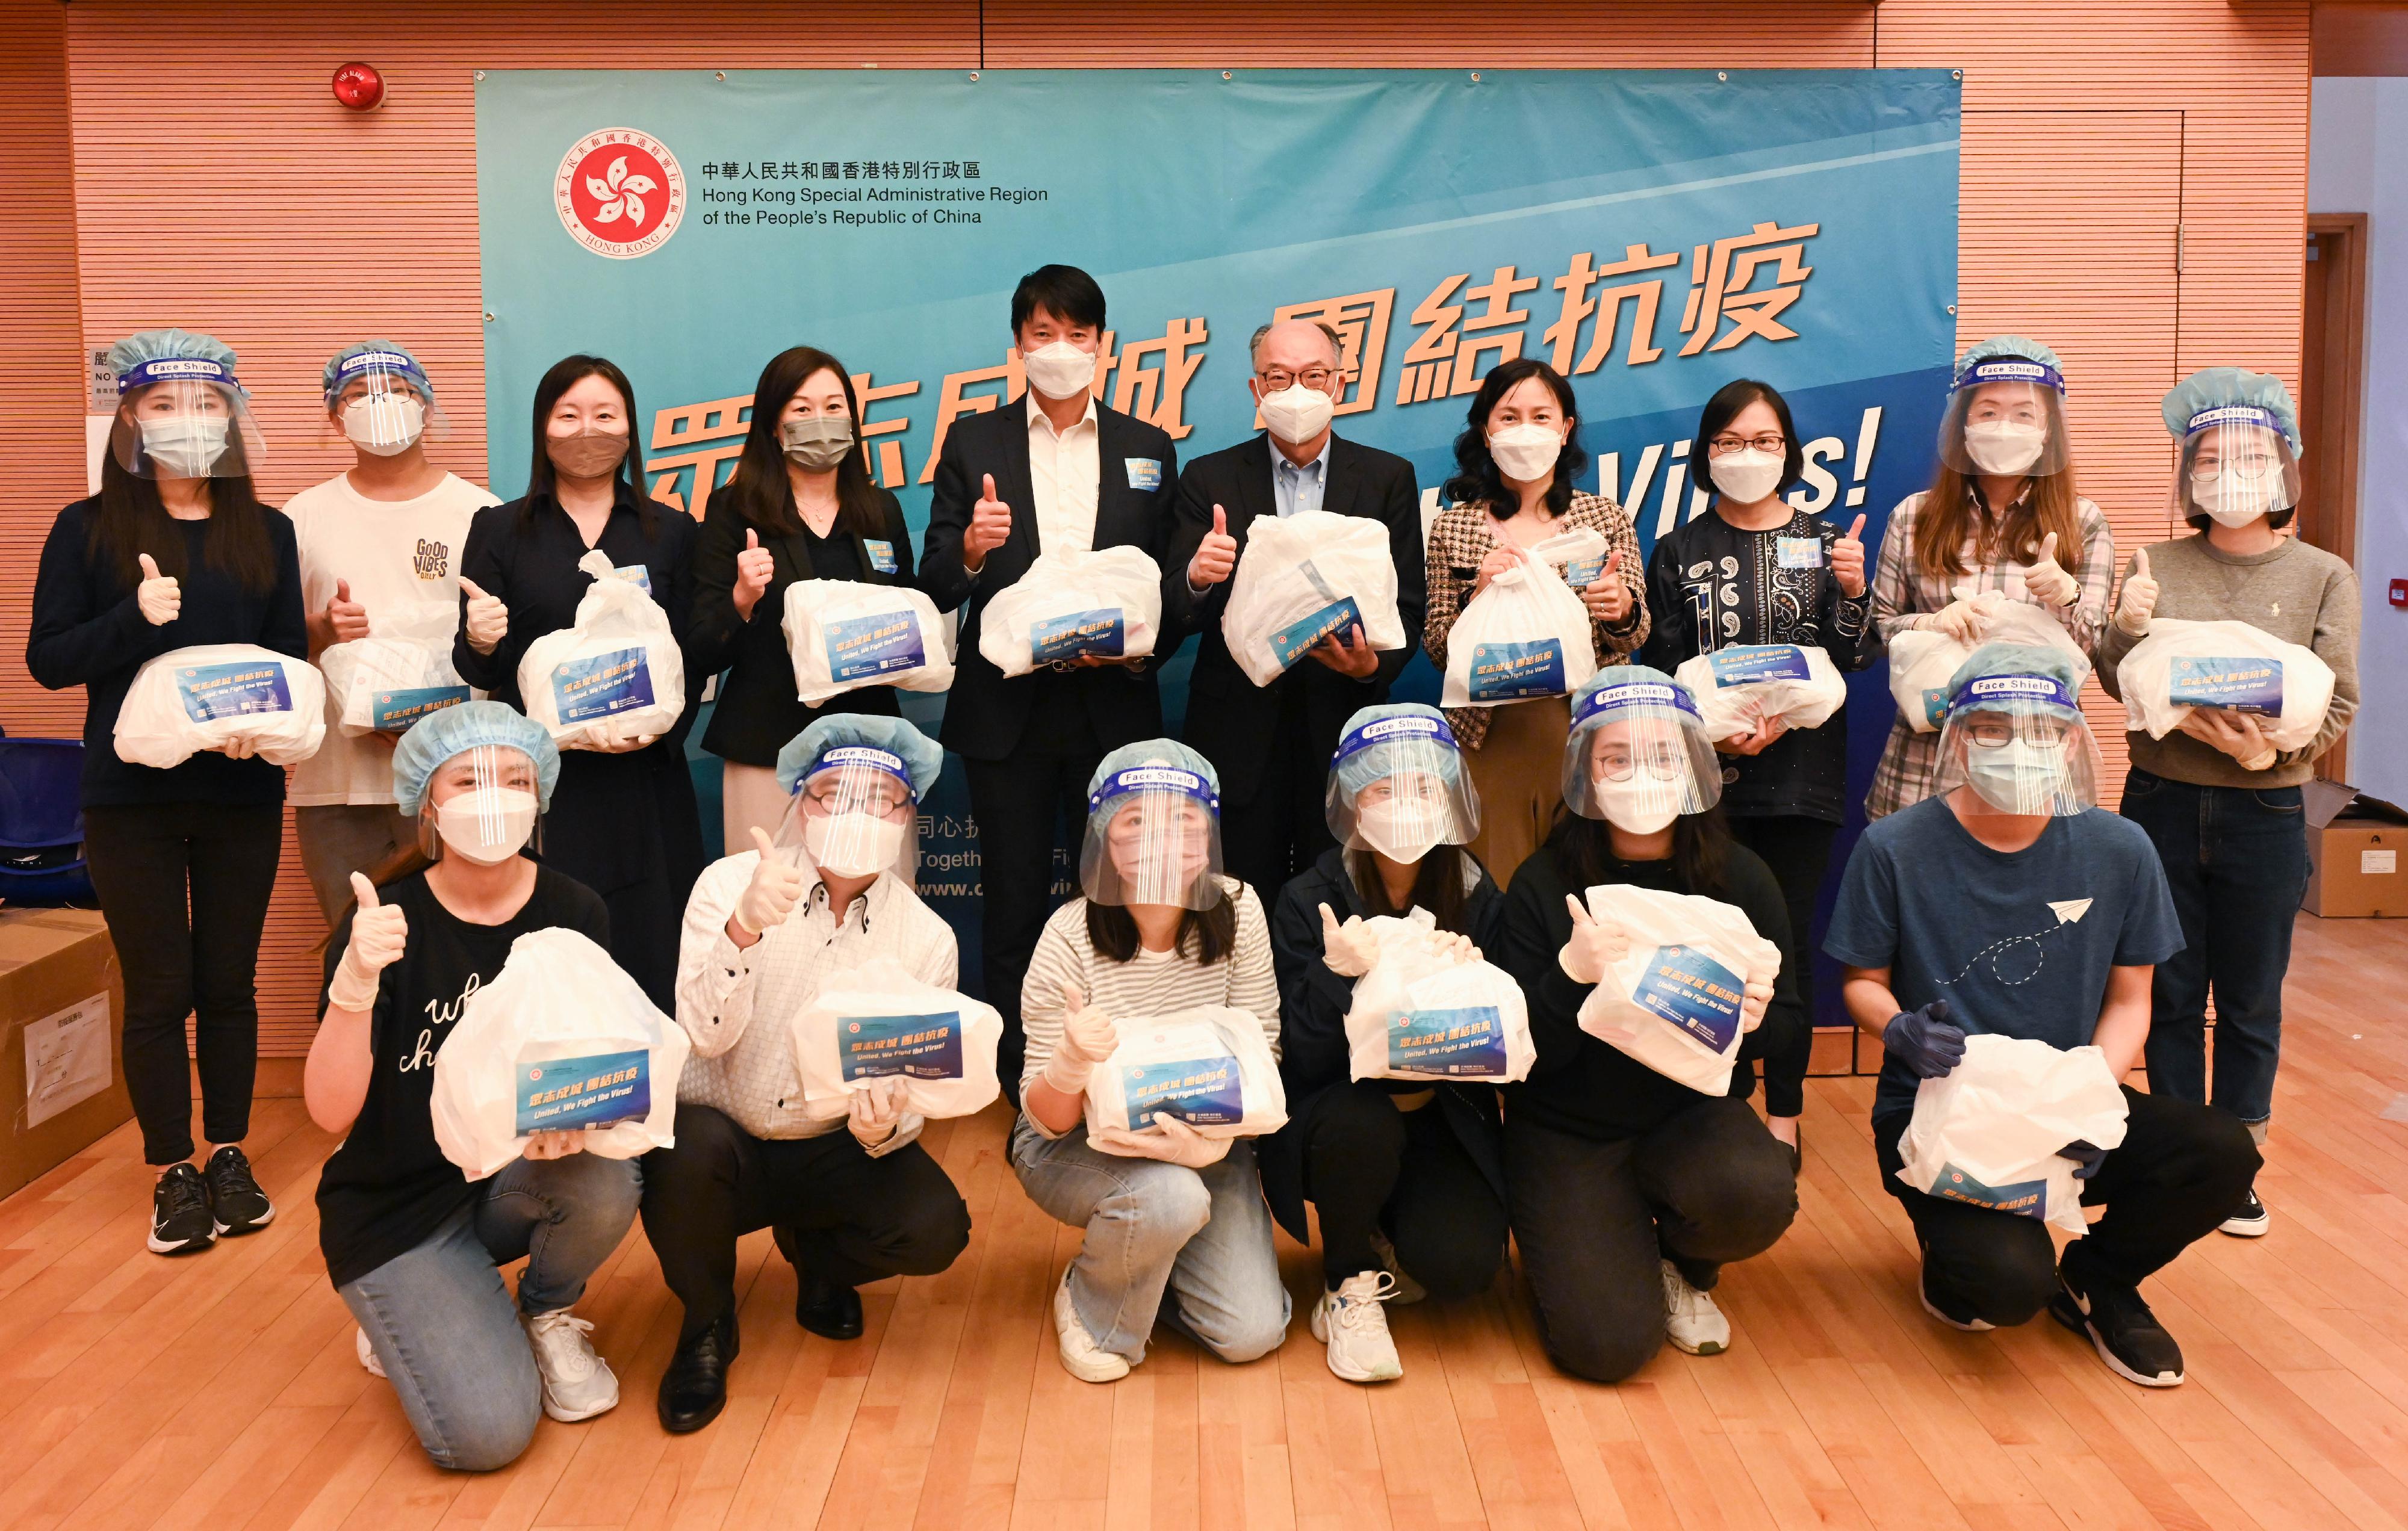 The Secretary for Transport and Housing, Mr Frank Chan Fan, today (March 31) joined colleagues from the Transport and Housing Bureau and departments under its purview to pack anti-epidemic service bags at Lohas Park Community Hall, Sai Kung. Photo shows Mr Chan (back row, fifth right); the Permanent Secretary for Transport and Housing (Transport), Ms Mable Chan (back row, fourth right); the Director of Highways, Mr Jimmy Chan (back row, fifth left); the Director of Marine, Ms Carol Yuen (back row, third right); the Deputy Secretary for Transport and Housing (Transport), Mrs Sharon Yip (back row, fourth left); and Deputy Director-General of Civil Aviation Miss Linda So (back row, third left) with colleagues at the centre.